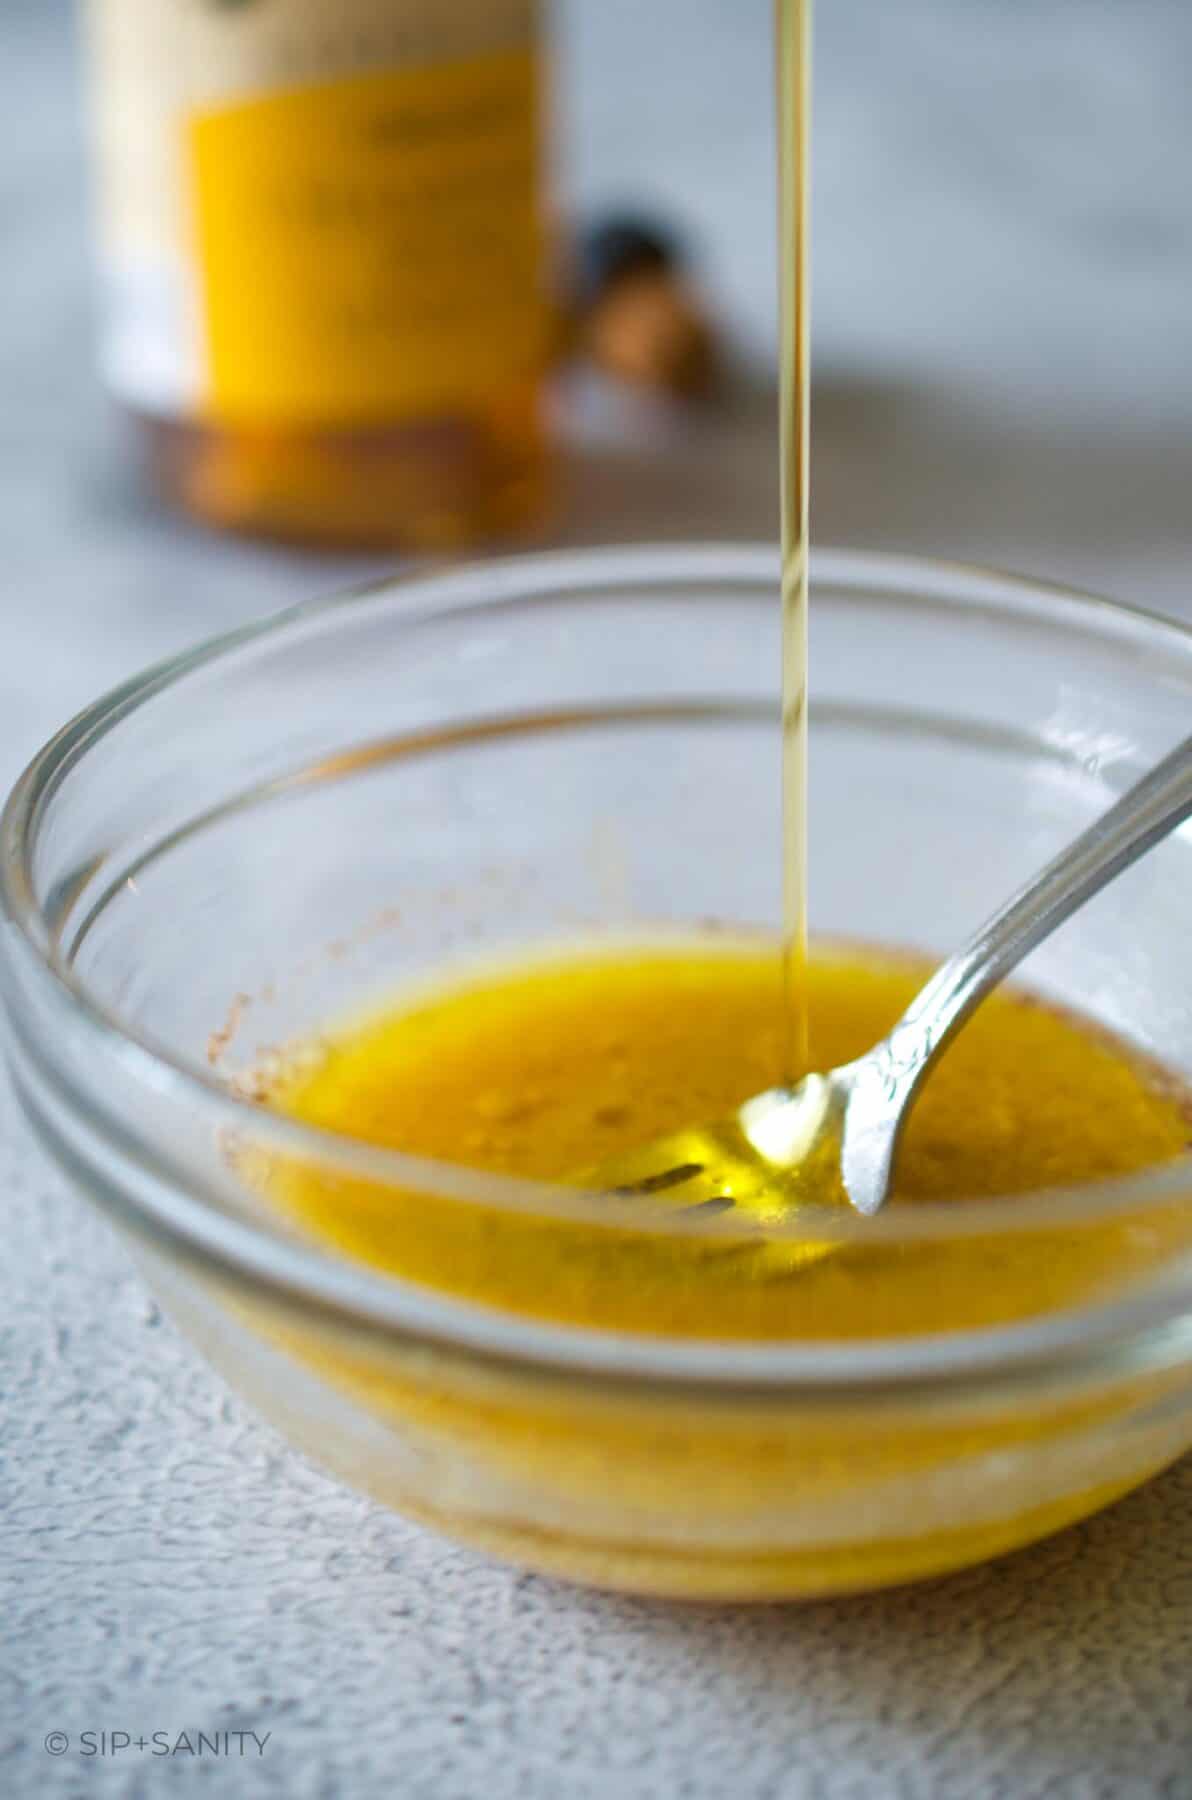 Olive oil being drizzled into a bowl with vinegar and mustard.